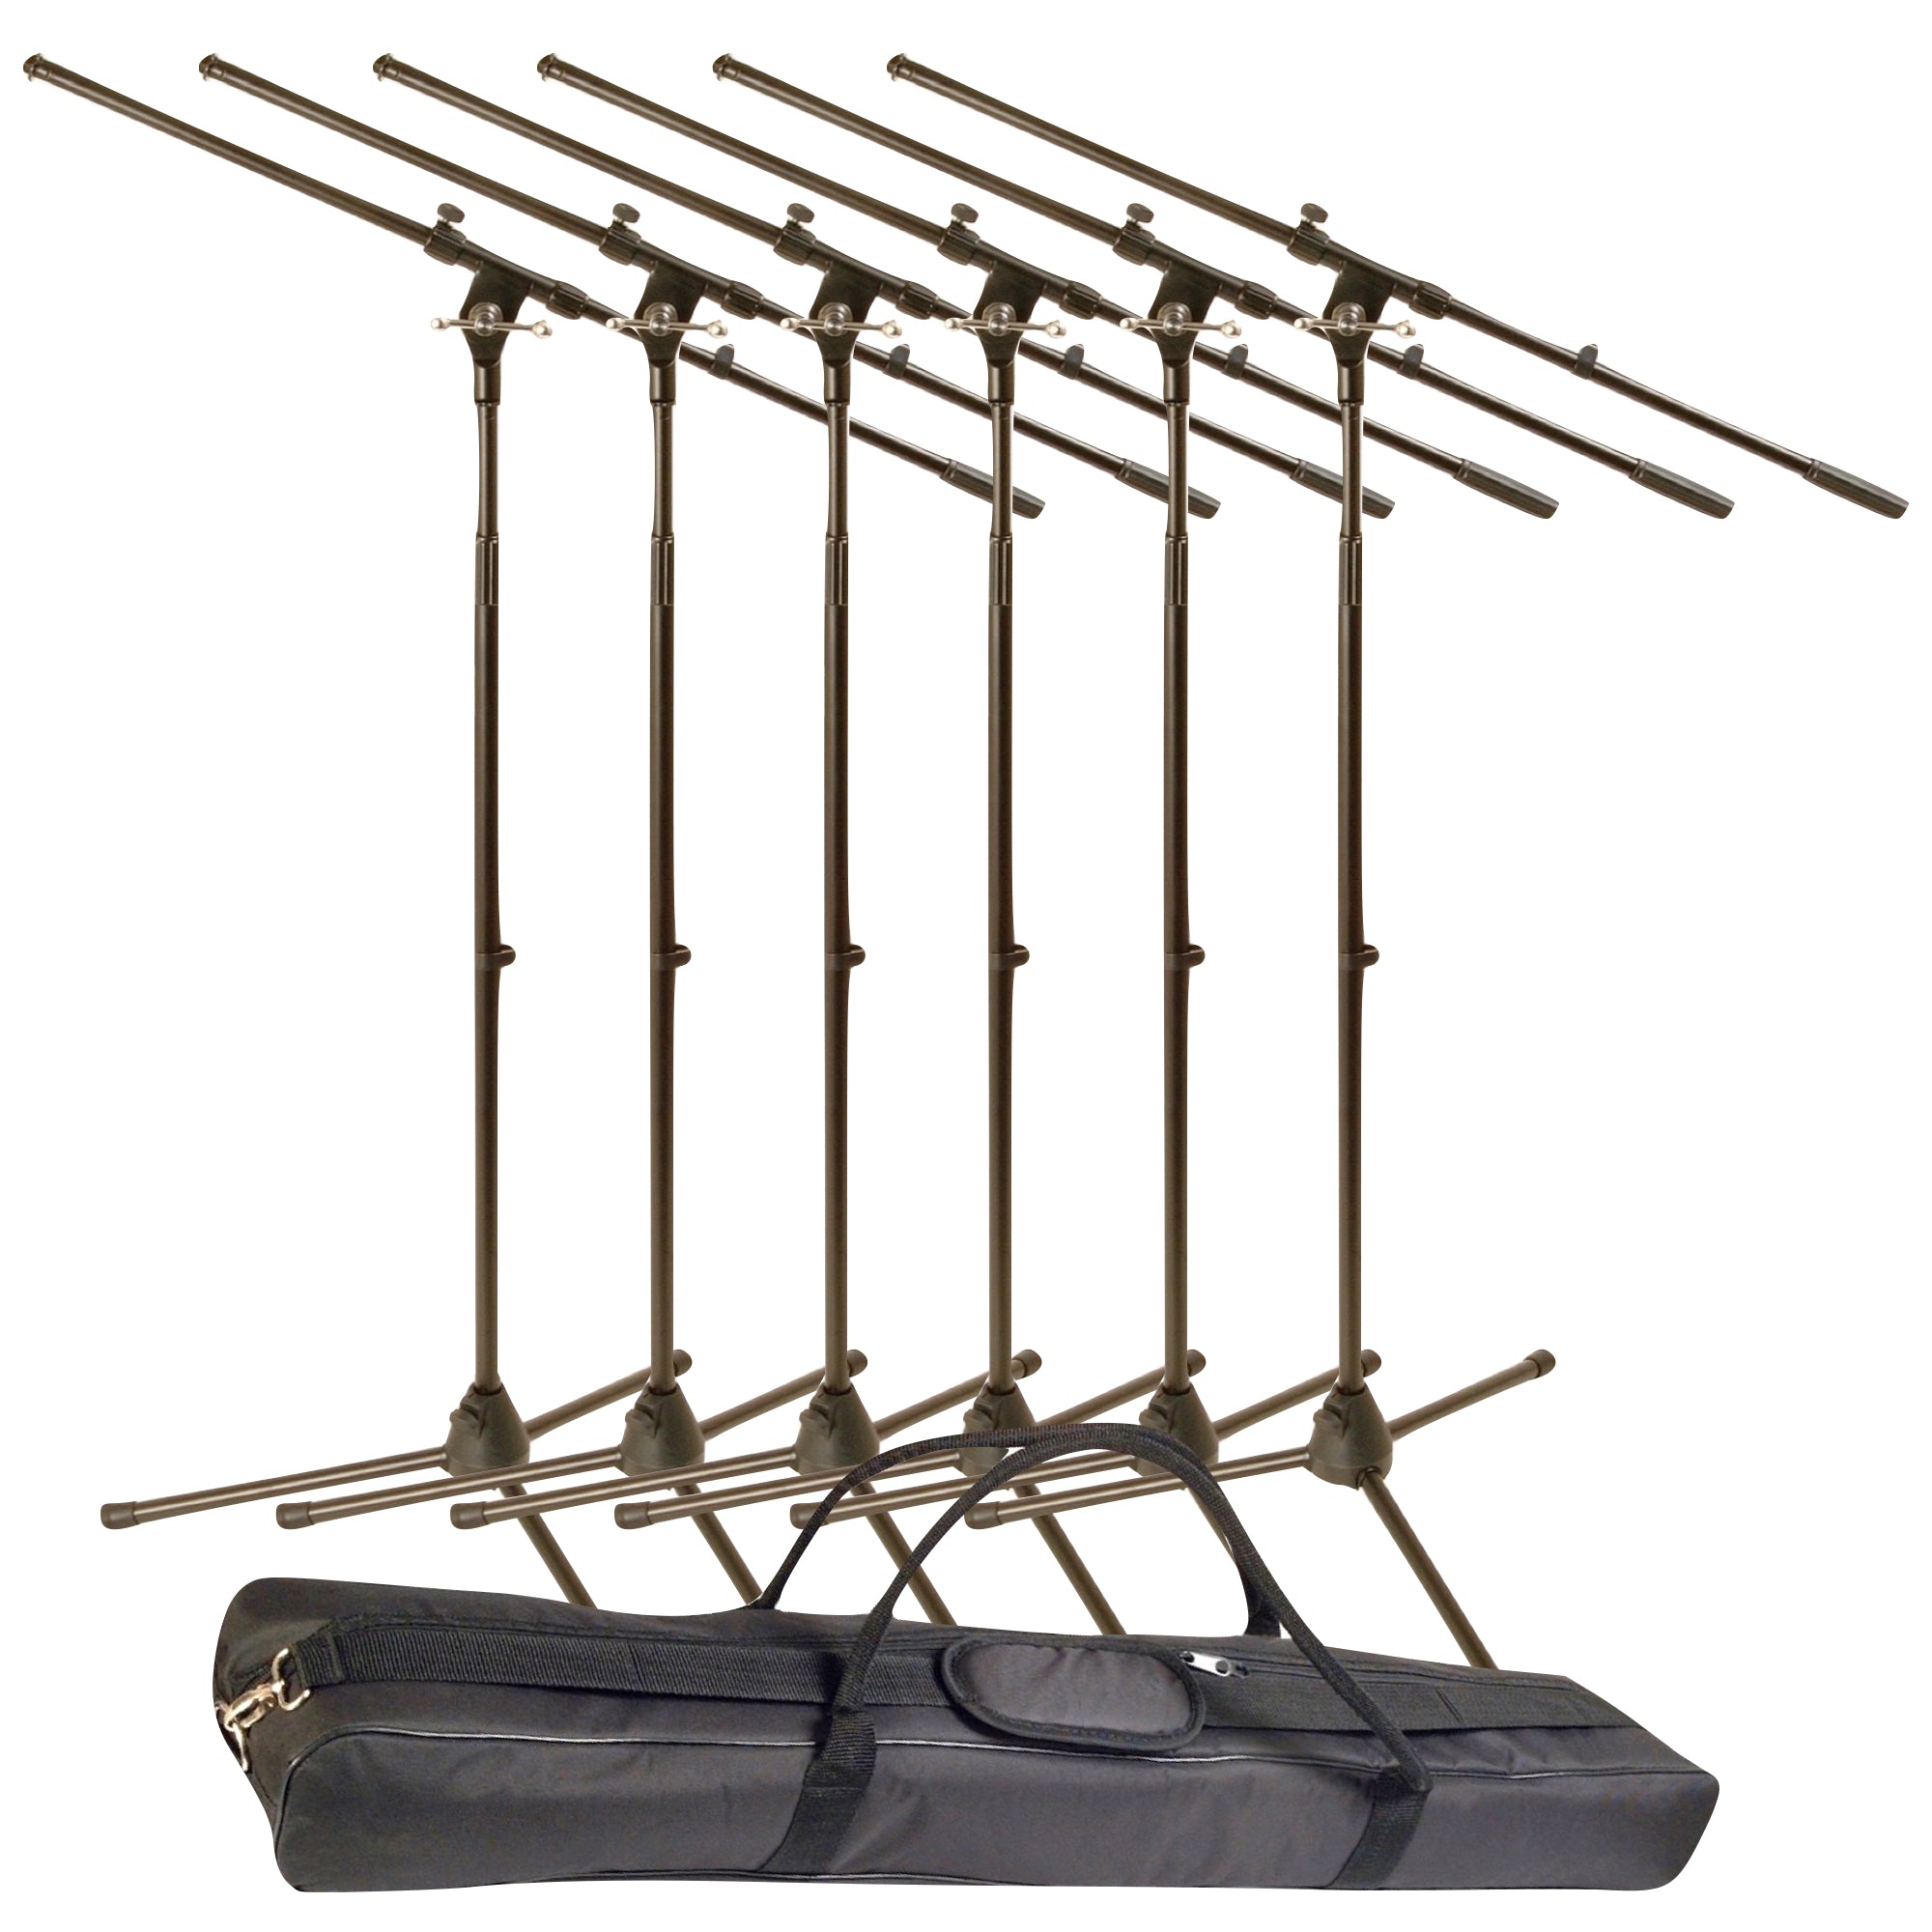 World Tour MSP600 Microphone Stand 6 Pack with Bag